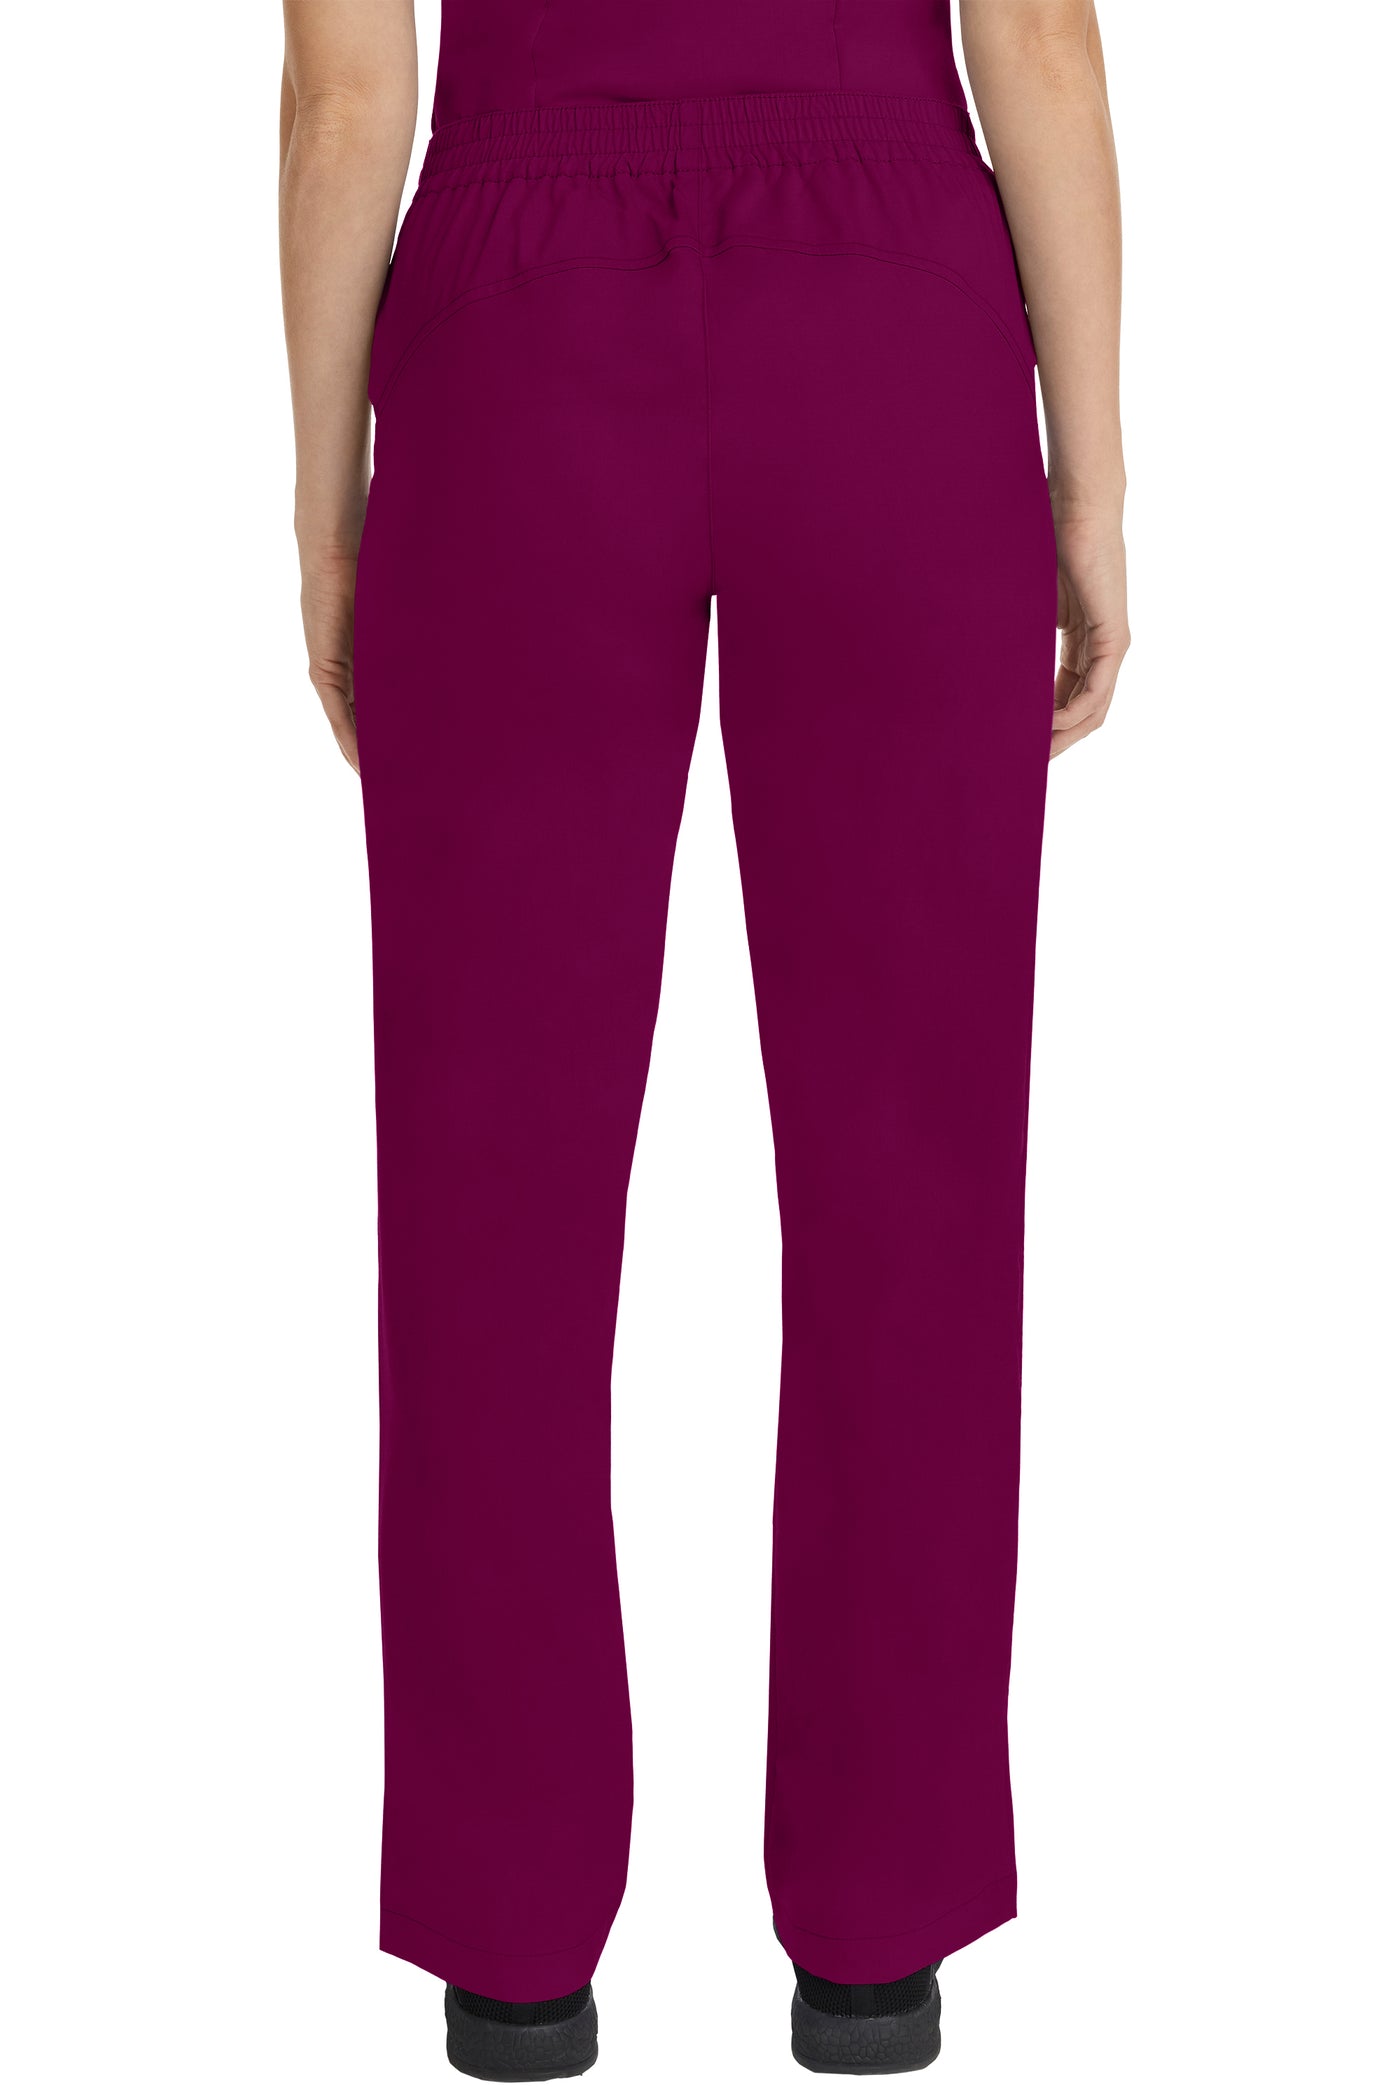 Taylor Pant by Healing Hands XXS-5XL/  WINE